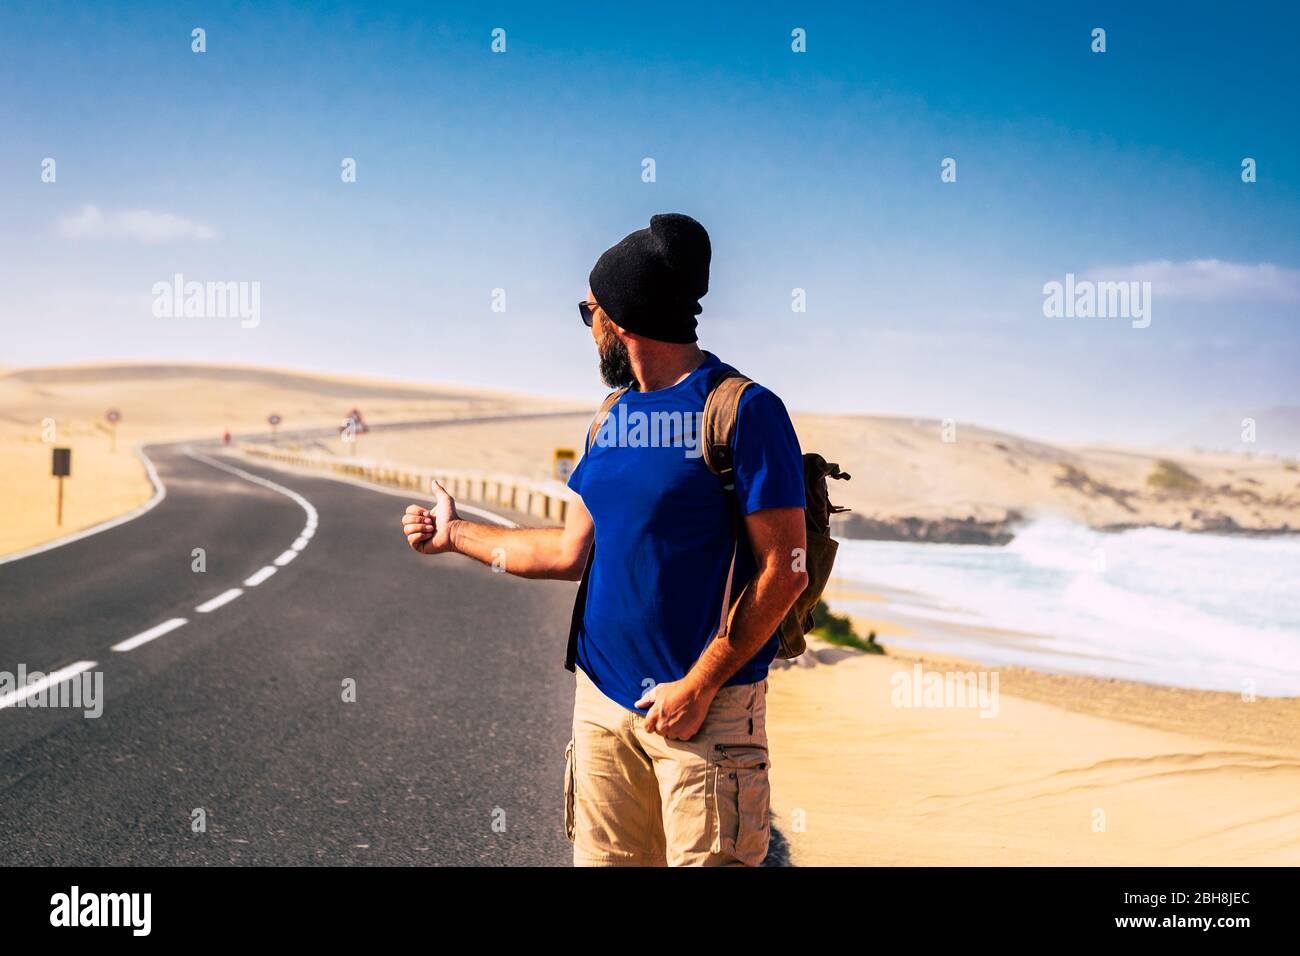 Hitcher alternative travel people concept with man with a backpack waiting for a car to share the trip - lonely travelers with long road and desert and sandy beach in background - holiday wild adventure Stock Photo